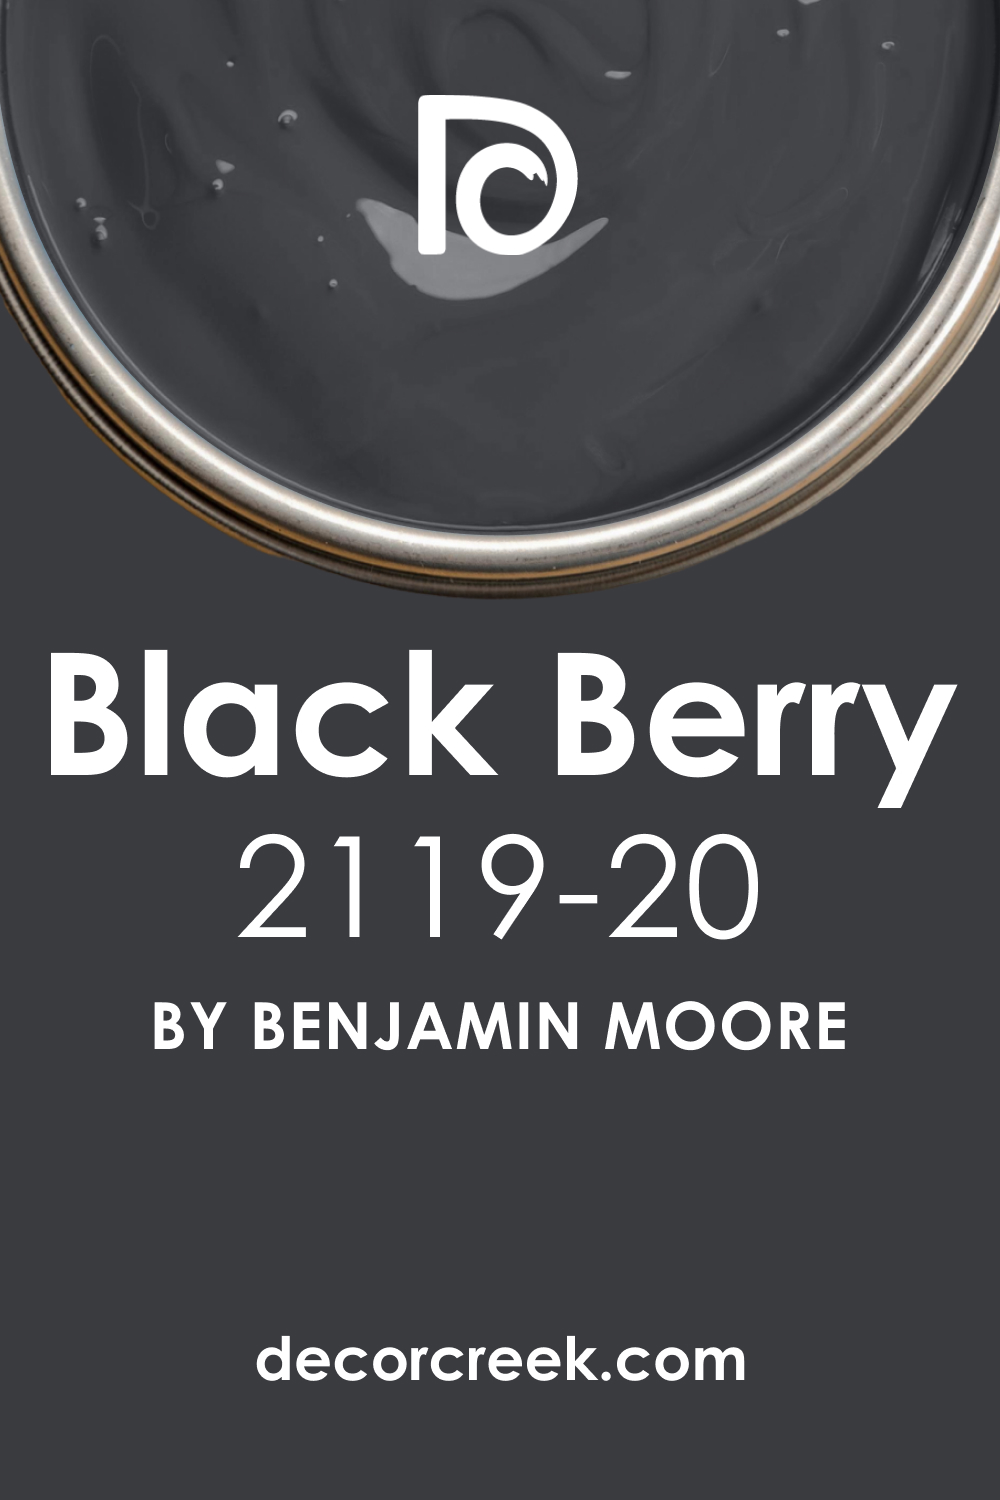 What Color Is Black Berry 2119-20?